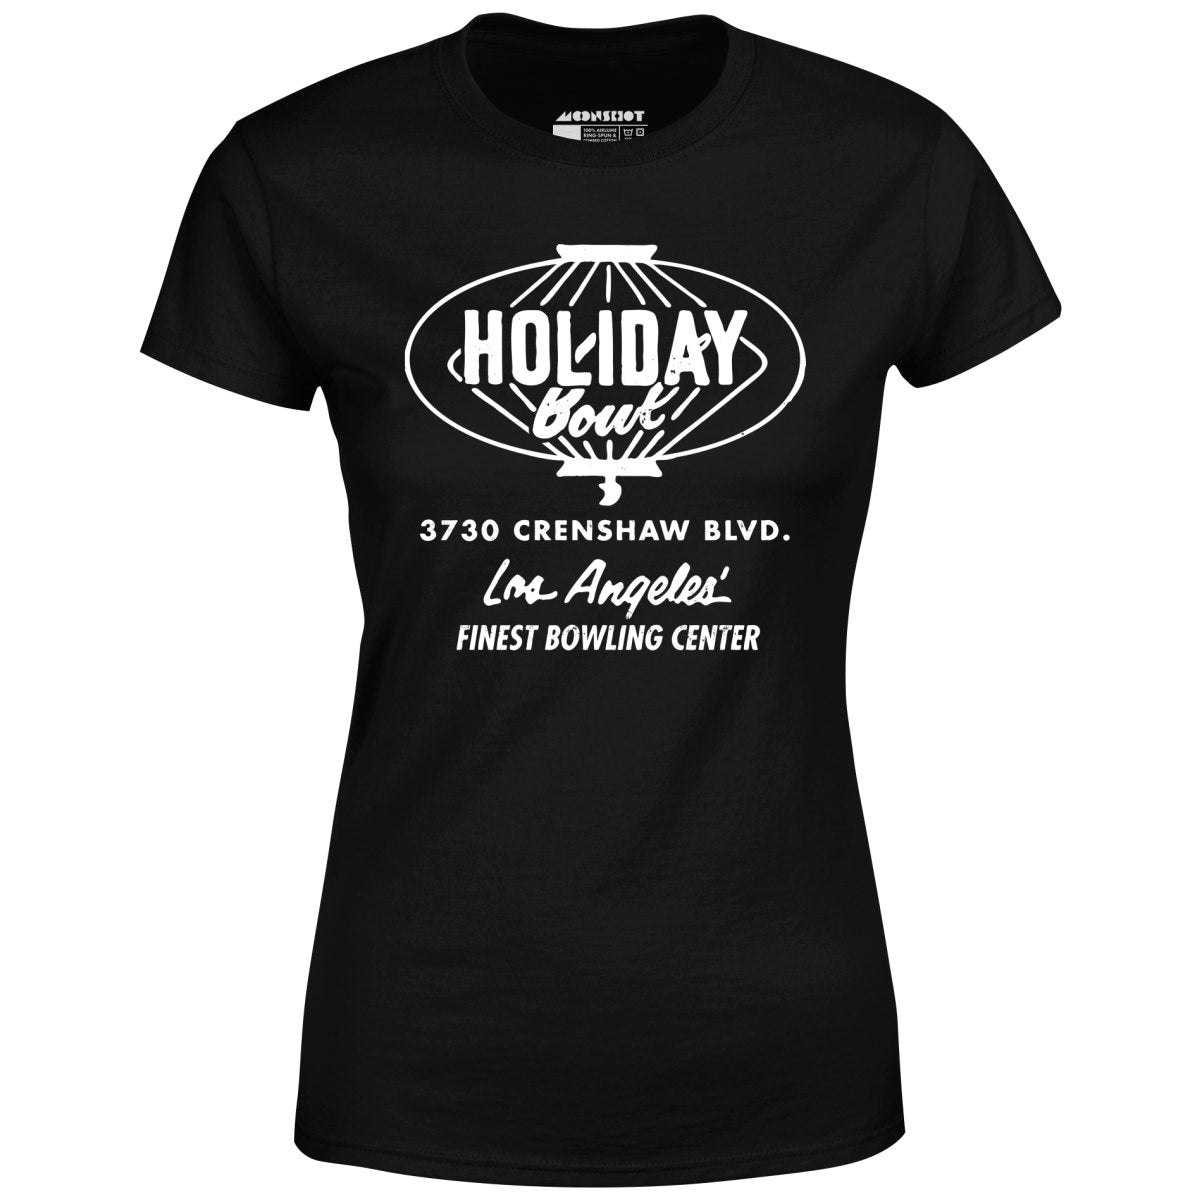 Holiday Bowl - Los Angeles, CA - Vintage Bowling Alley - Women's T-Shirt